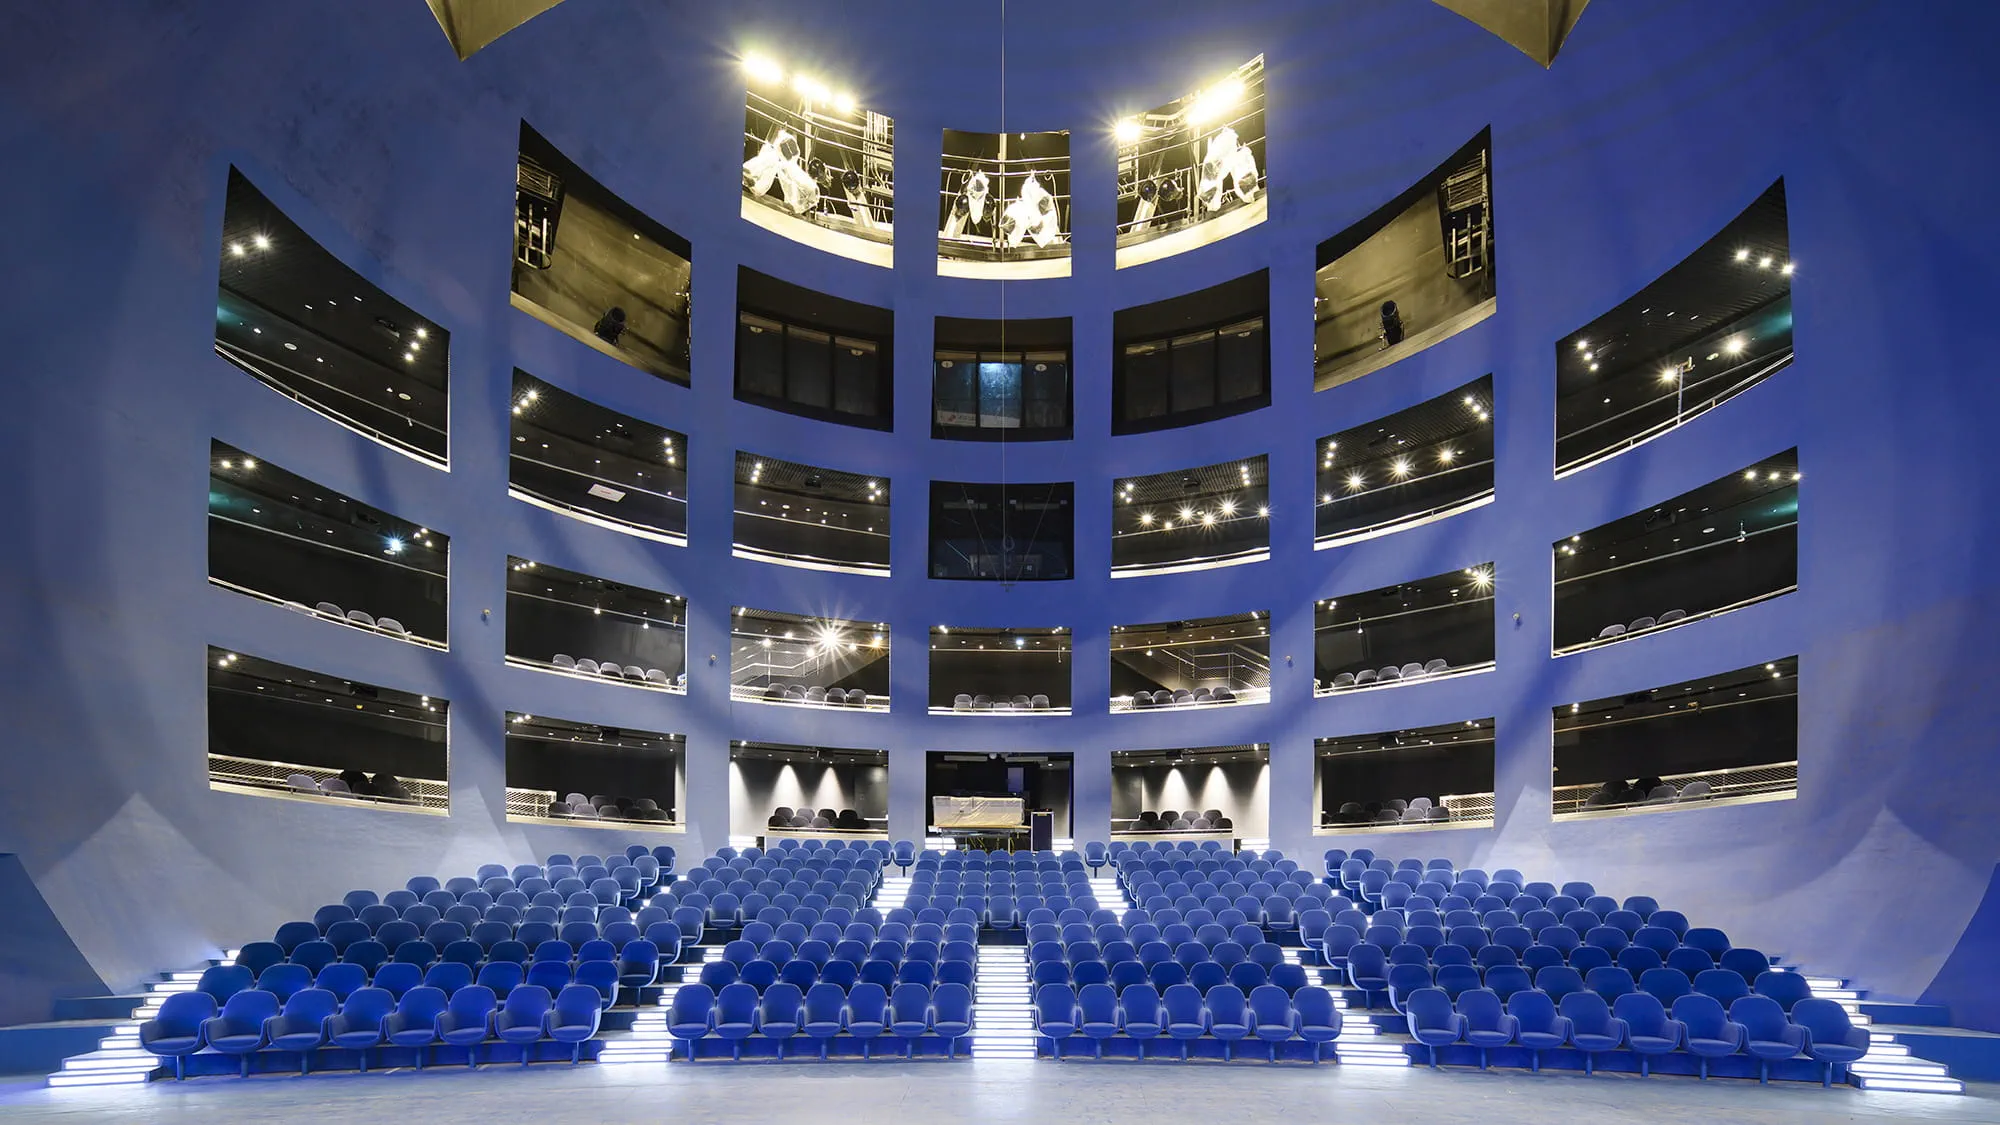 Each theatre can be used independently or in combination